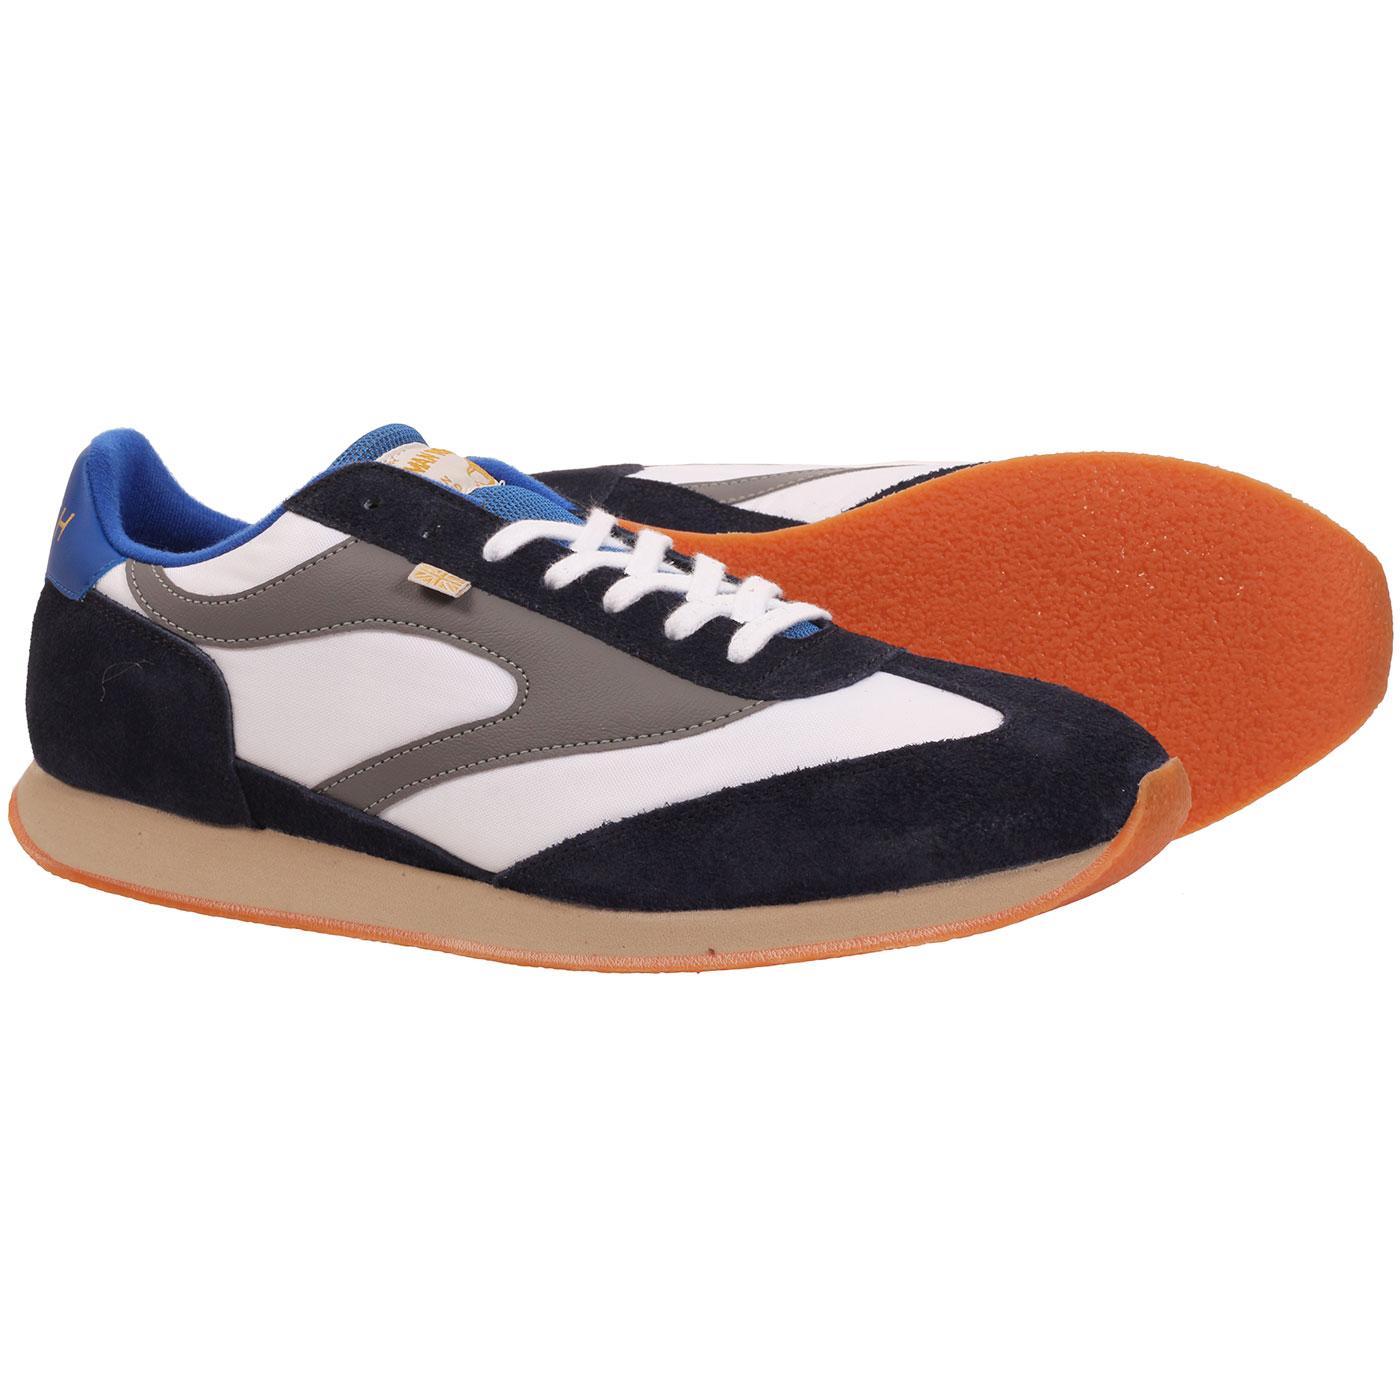 WALSH Fierce + Made in England Retro Trainers White/Navy